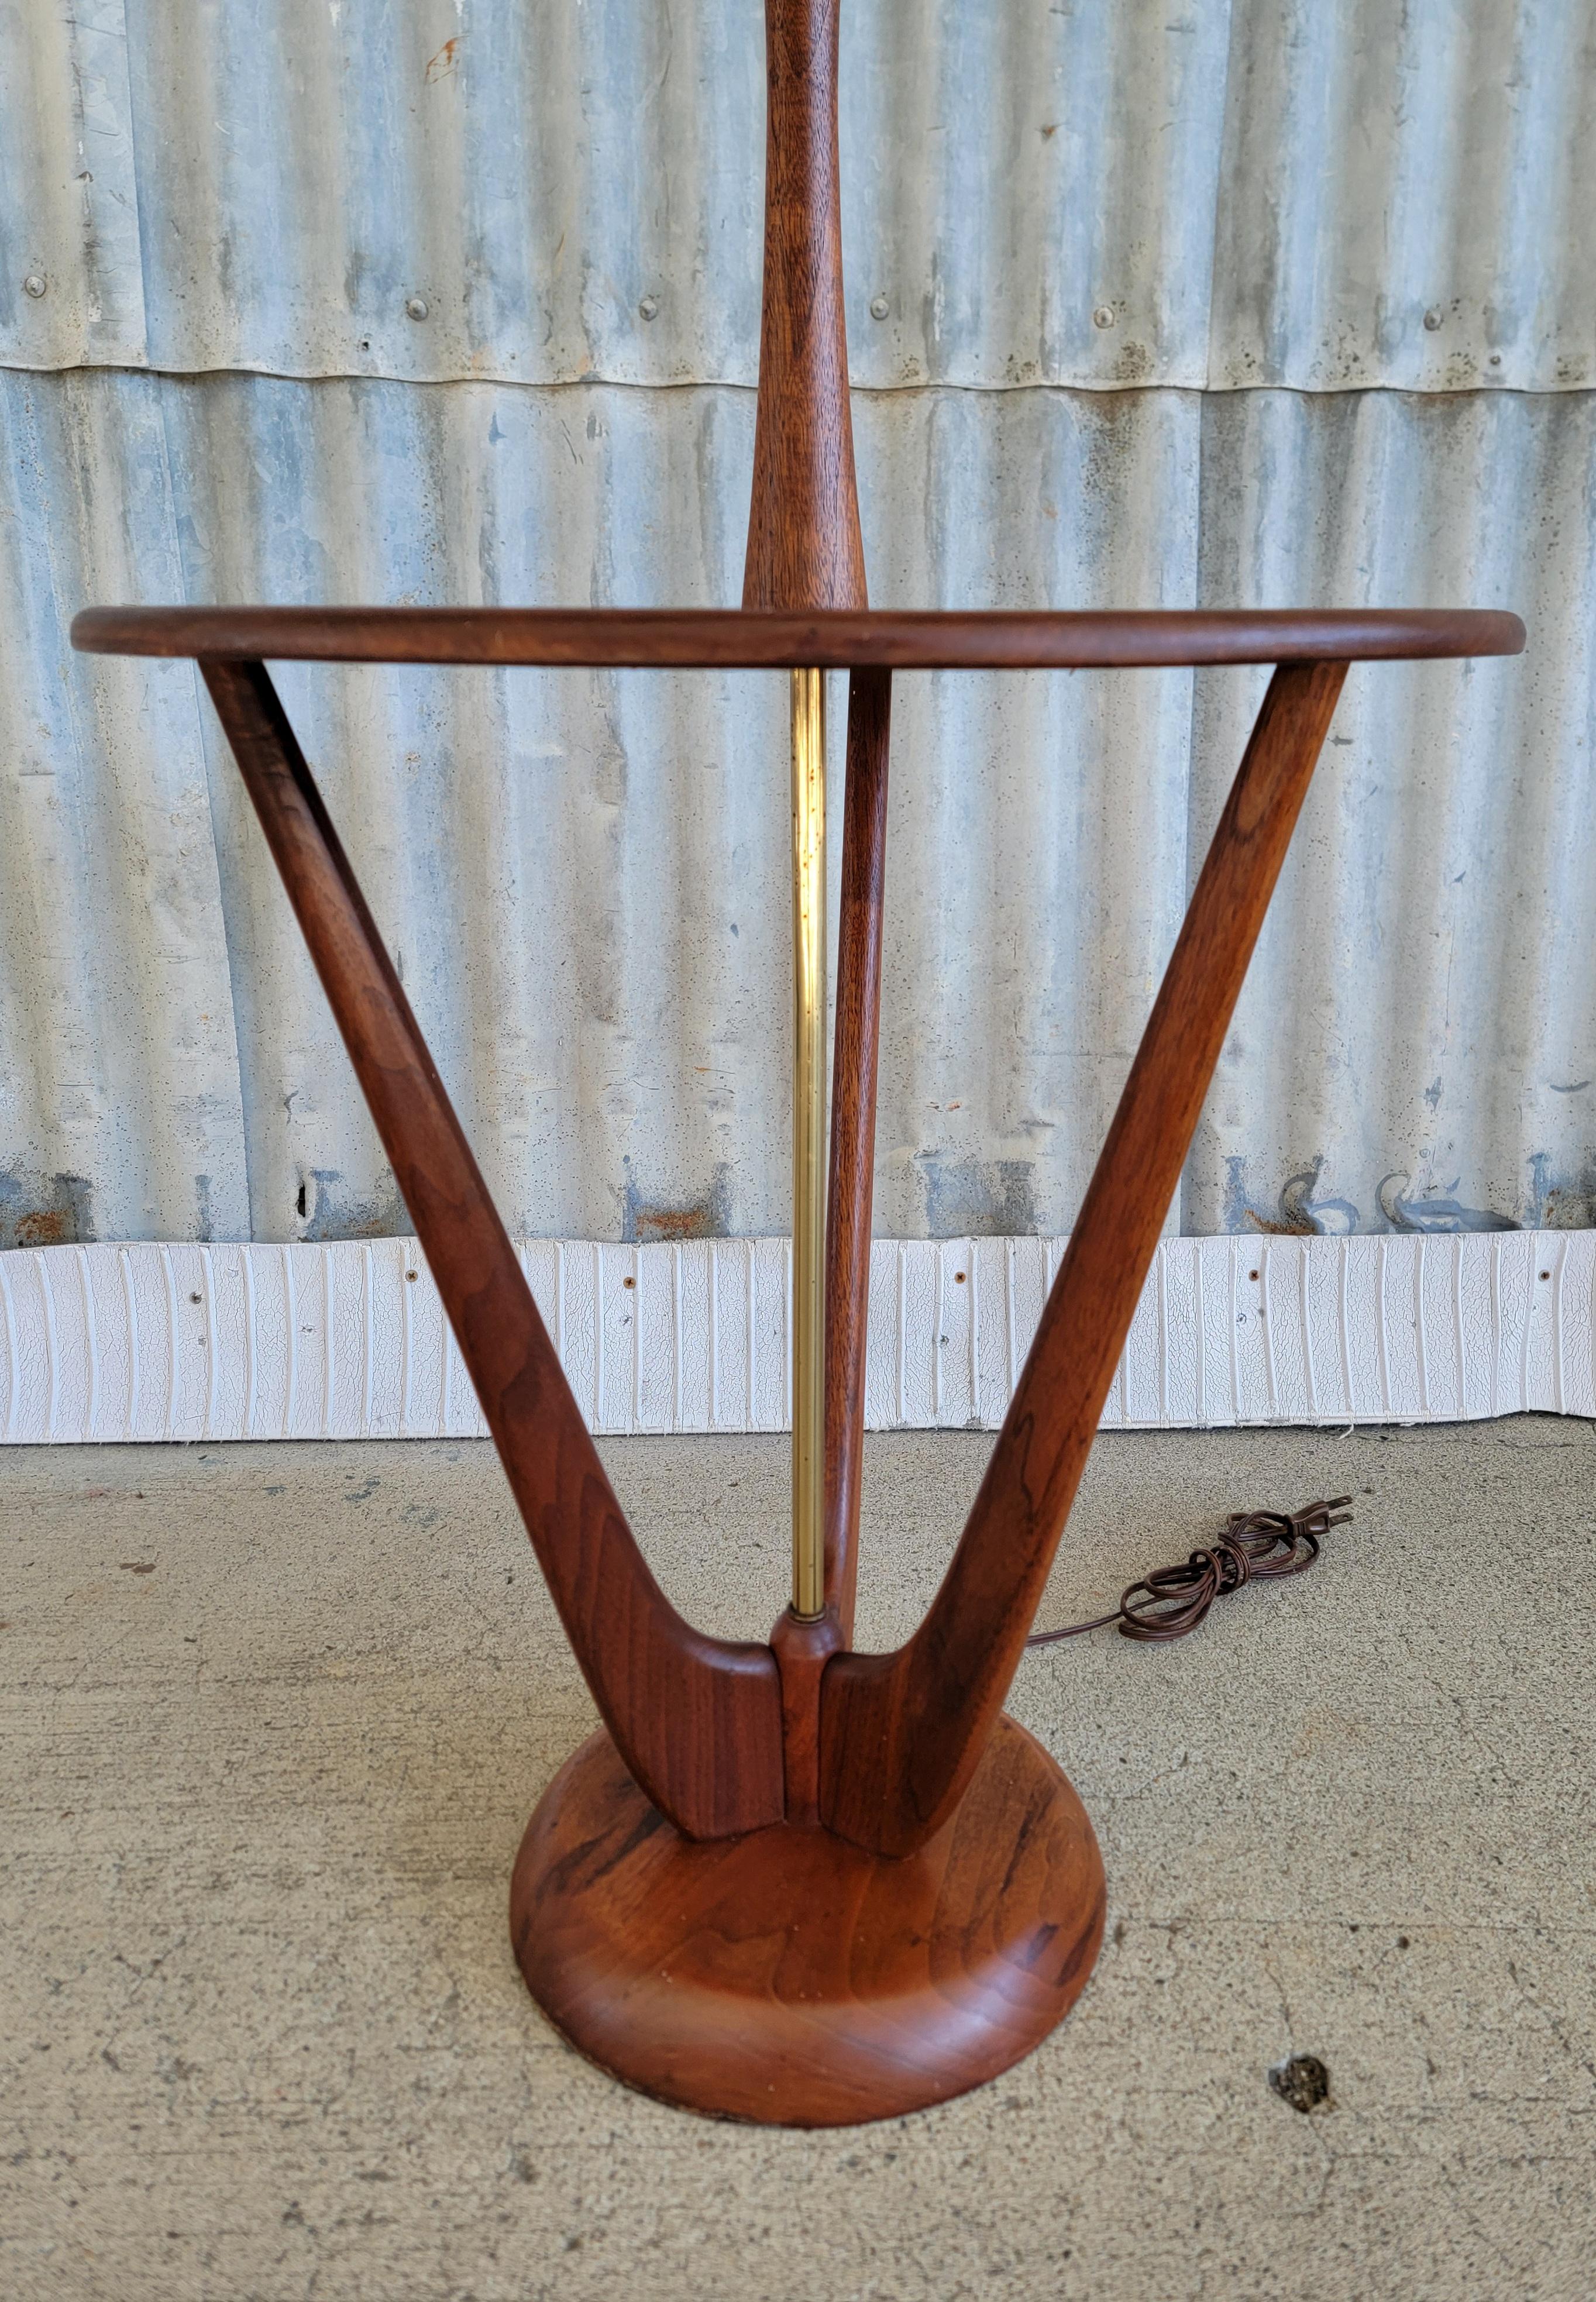 Sculptural floor / end table lamp crafted in solid walnut. In the manner of Modeline Lamp Company. Circa. 1960's. Measures 48.5 in to top of finial. Circular table top measures 20 in high. Original finish. Overall, in very good vintage condition